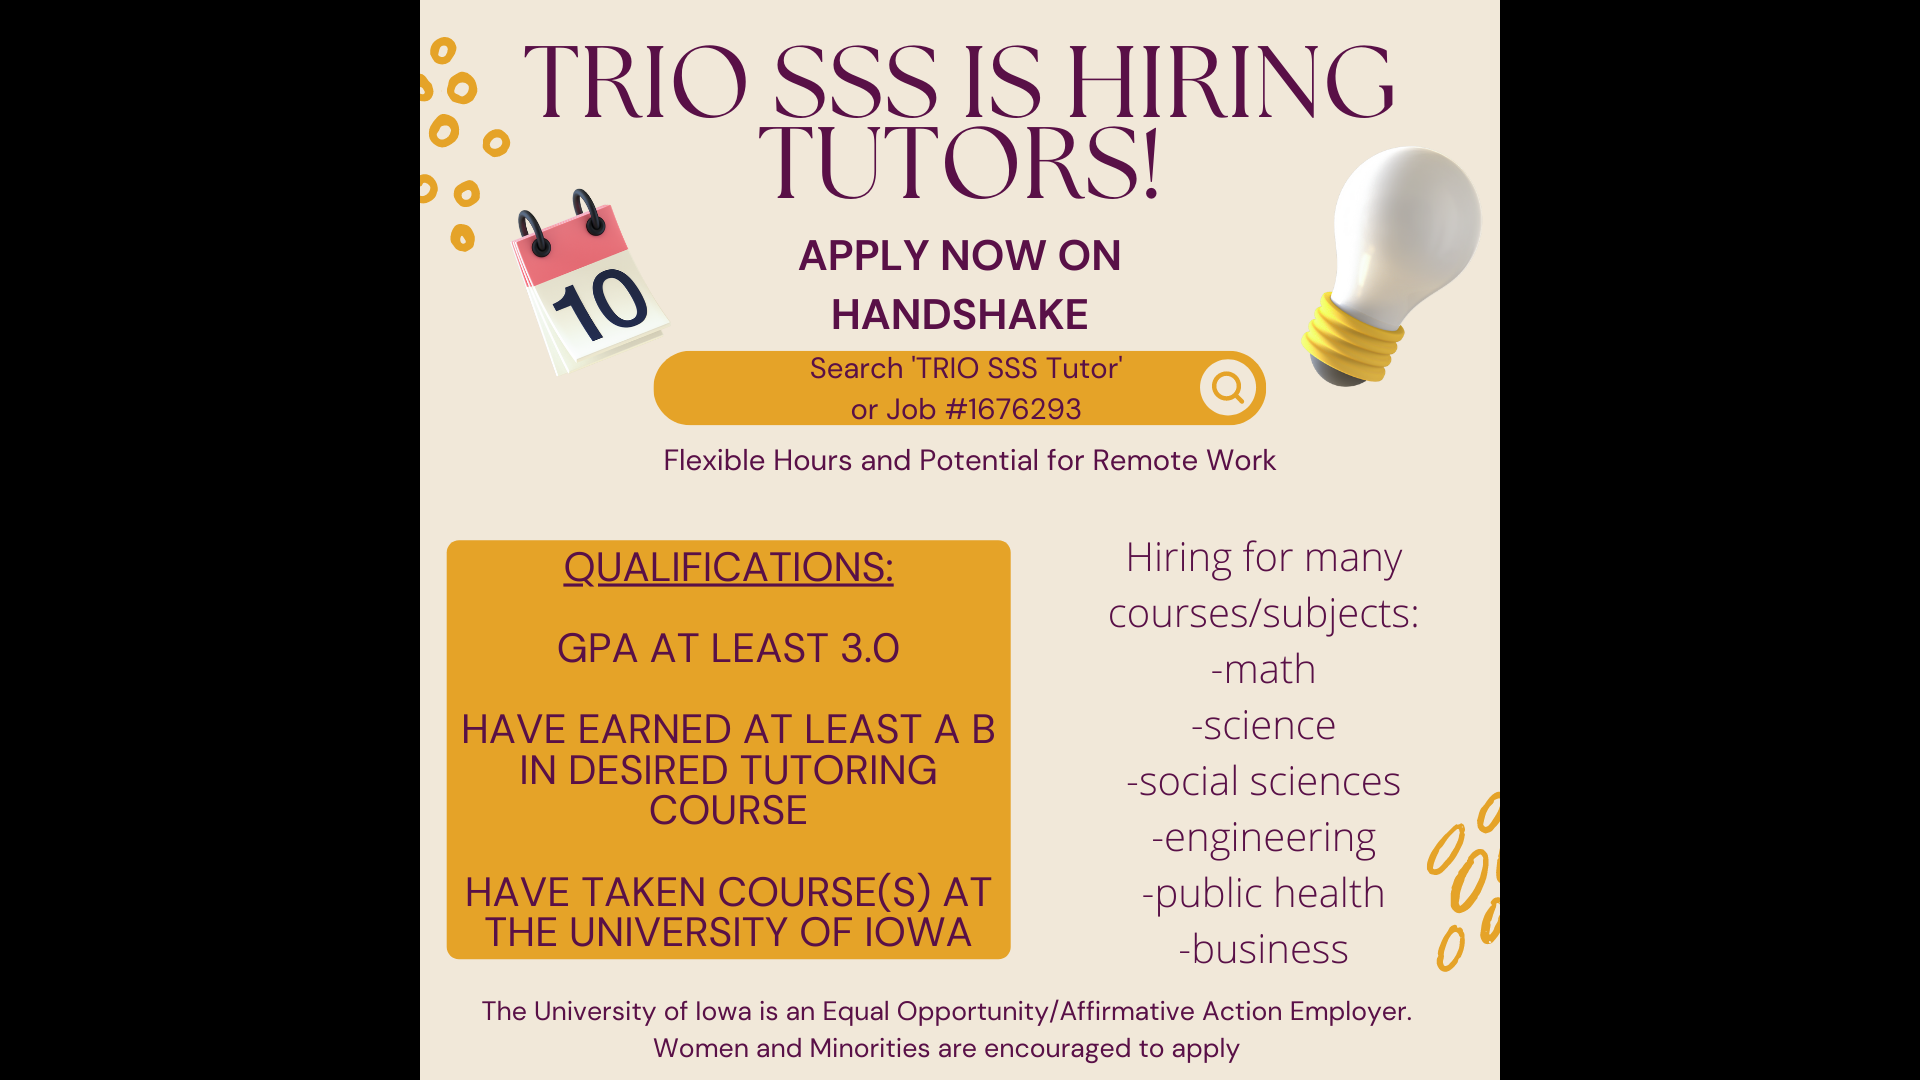 An ad reading as follows: "TRIO SSS is hiring tutors! Apply now on Handshake. Search 'TRIO SSS Tutor' or Job #1676293. Flexible hours and potential for remote work. Qualifications: GPA at least 3.0. Have earned at least a B in desired tutoring course. Have taken course(s) at the University of Iowa. Hiring for many couses/subject: Math, science, social sciences, engineering, public health, business. The University of Iowa is an equal opportunity/affirmative action employer. Women and minorities are encouraged to apply."